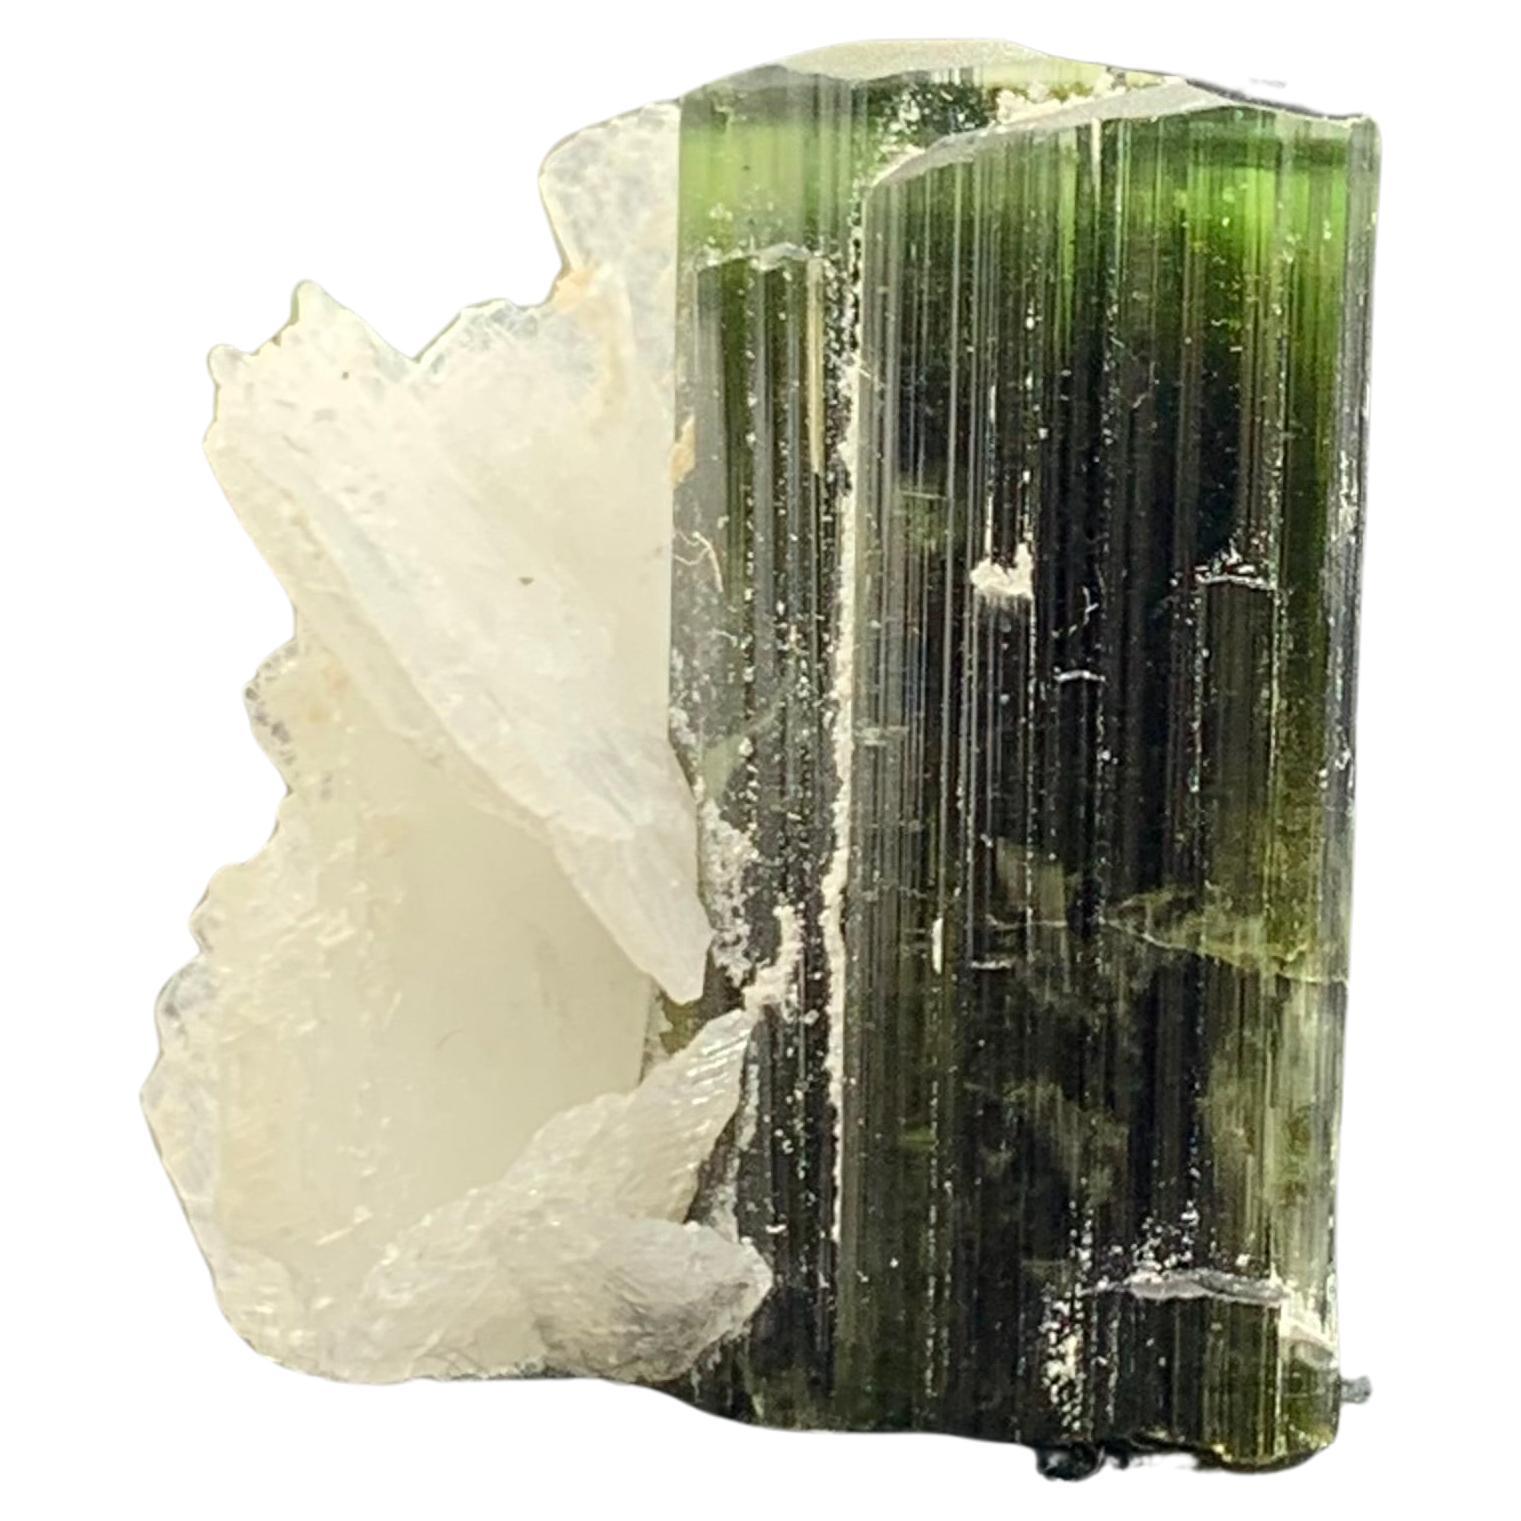 46.95 Cts Lovely Tourmaline With Albite Specimen From Stak Nala Valley, Pakistan